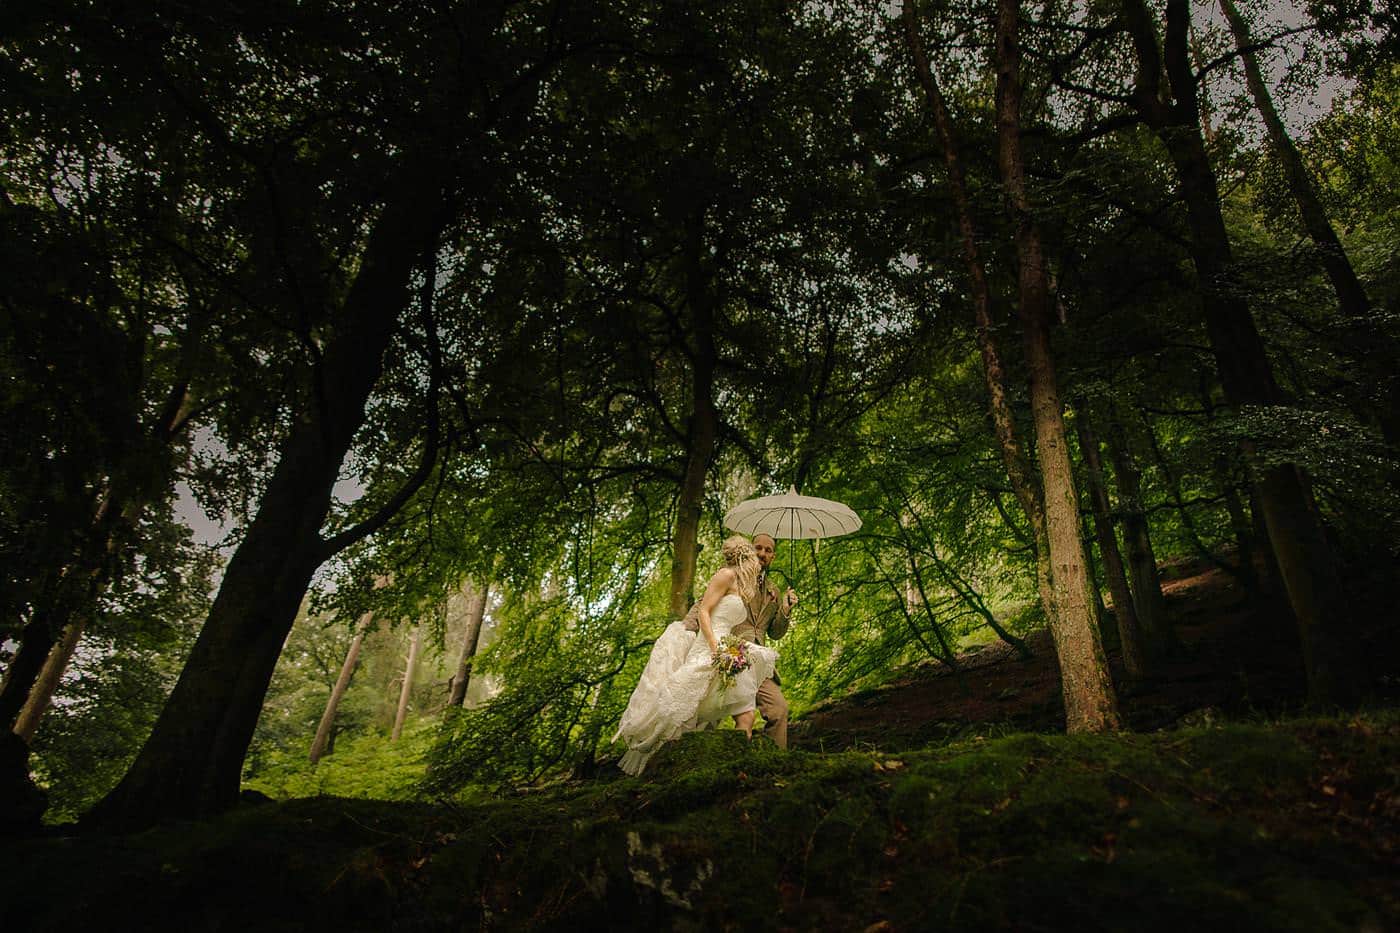 On their wedding day, a bride and groom stand beneath an umbrella, surrounded by the enchanting beauty of the woods.